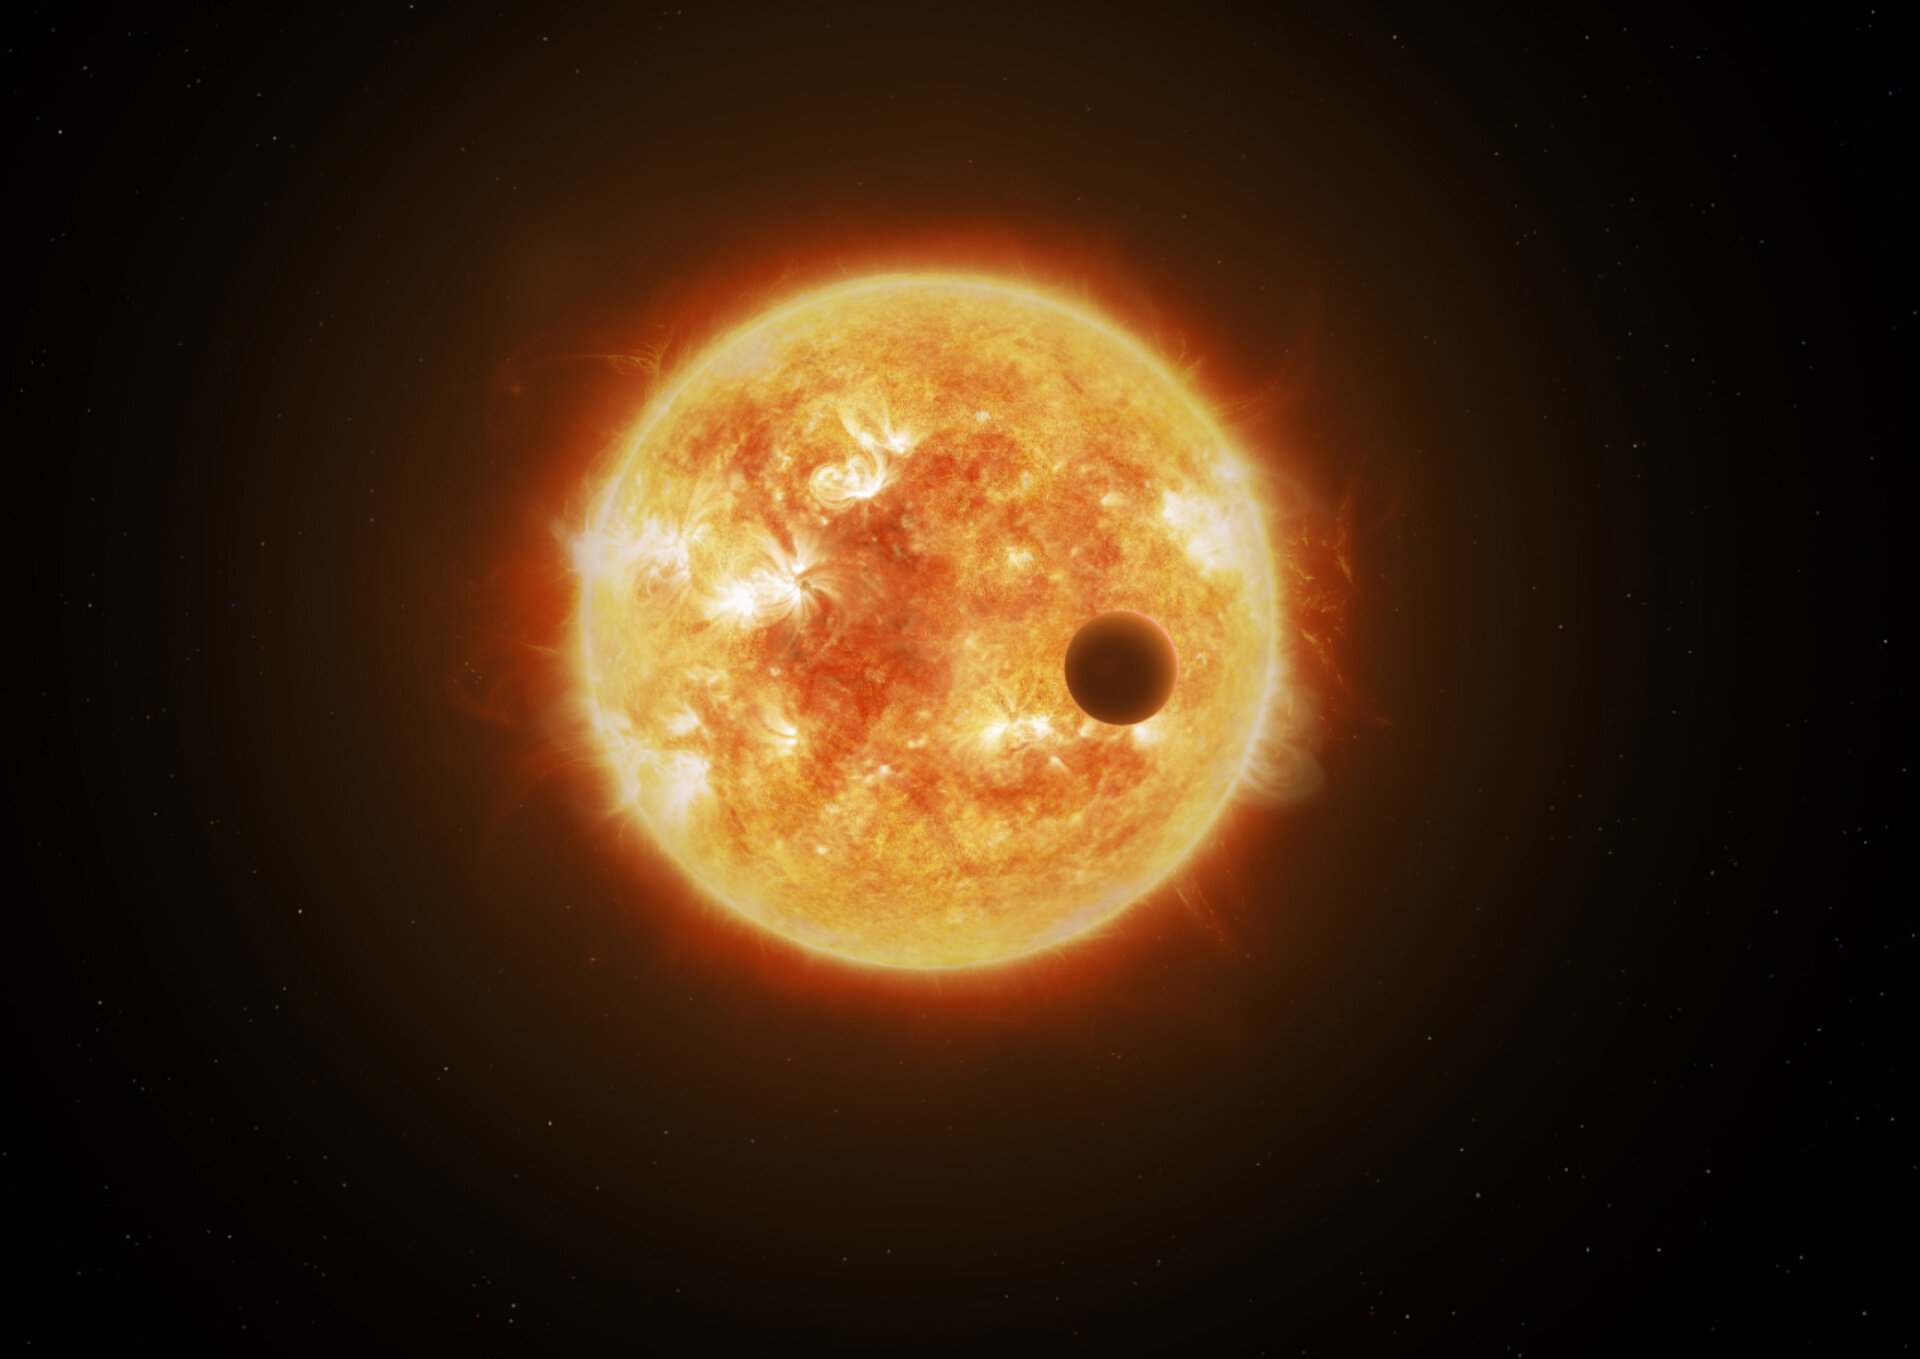 Artist's impression of planet transiting a star